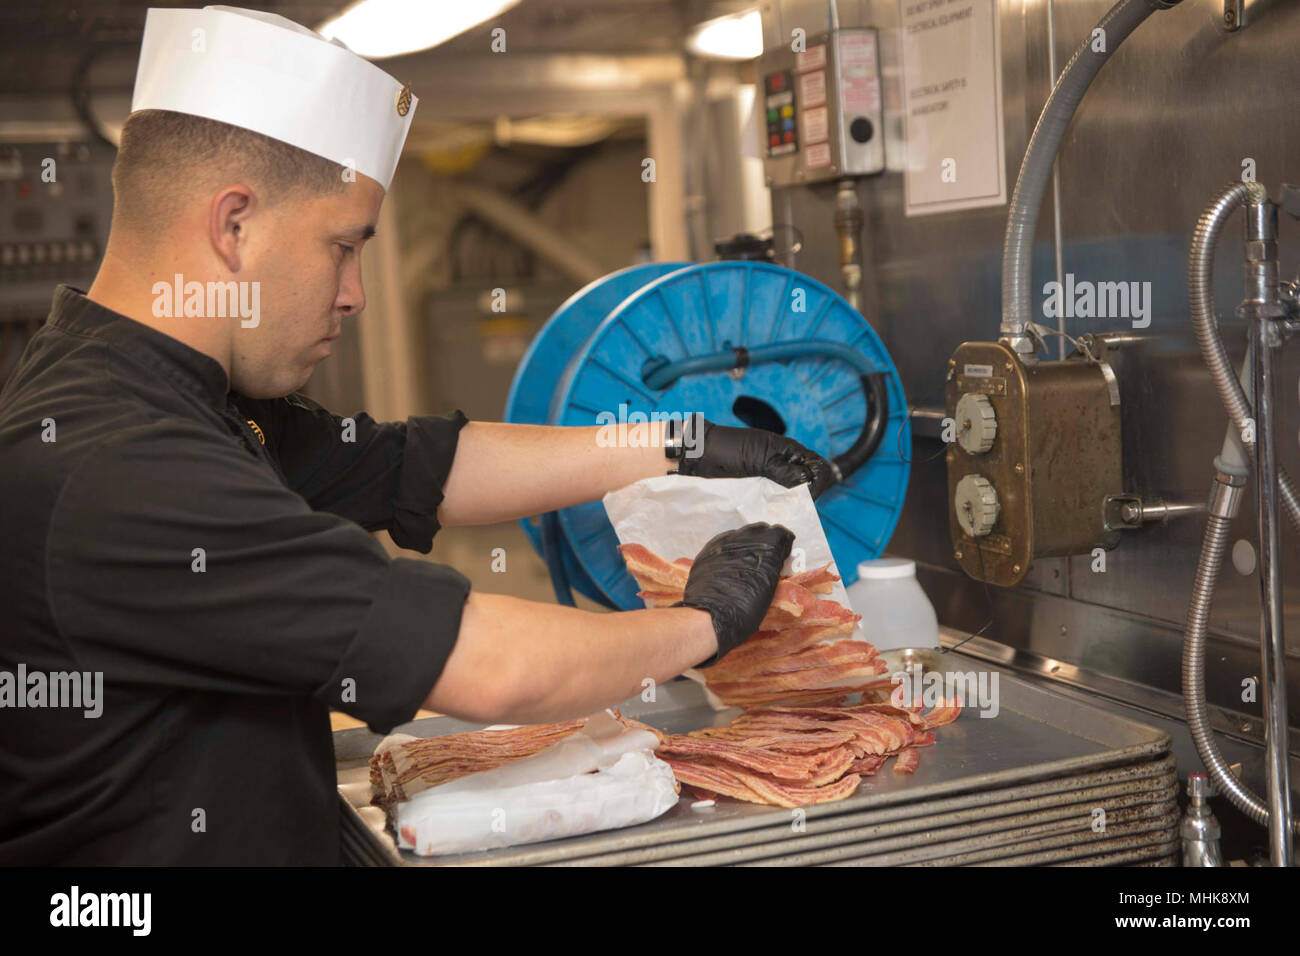 MEDITERRANEAN SEA (March 25, 2018) Marine Corps Staff Sgt. Salvatore Dely, from Tucson, Az., assigned to the Battalion Landing Team, 26th Marine Expeditionary Unit, places bacon on a sheet pan in preparation for brunch aboard the San Antonio-class amphibious transport dock ship USS New York (LPD 21) March 25, 2018. New York, homeported in Mayport, Fla., is conducting naval operations in the U.S. 6th Fleet area of operations. (U.S. Navy Stock Photo